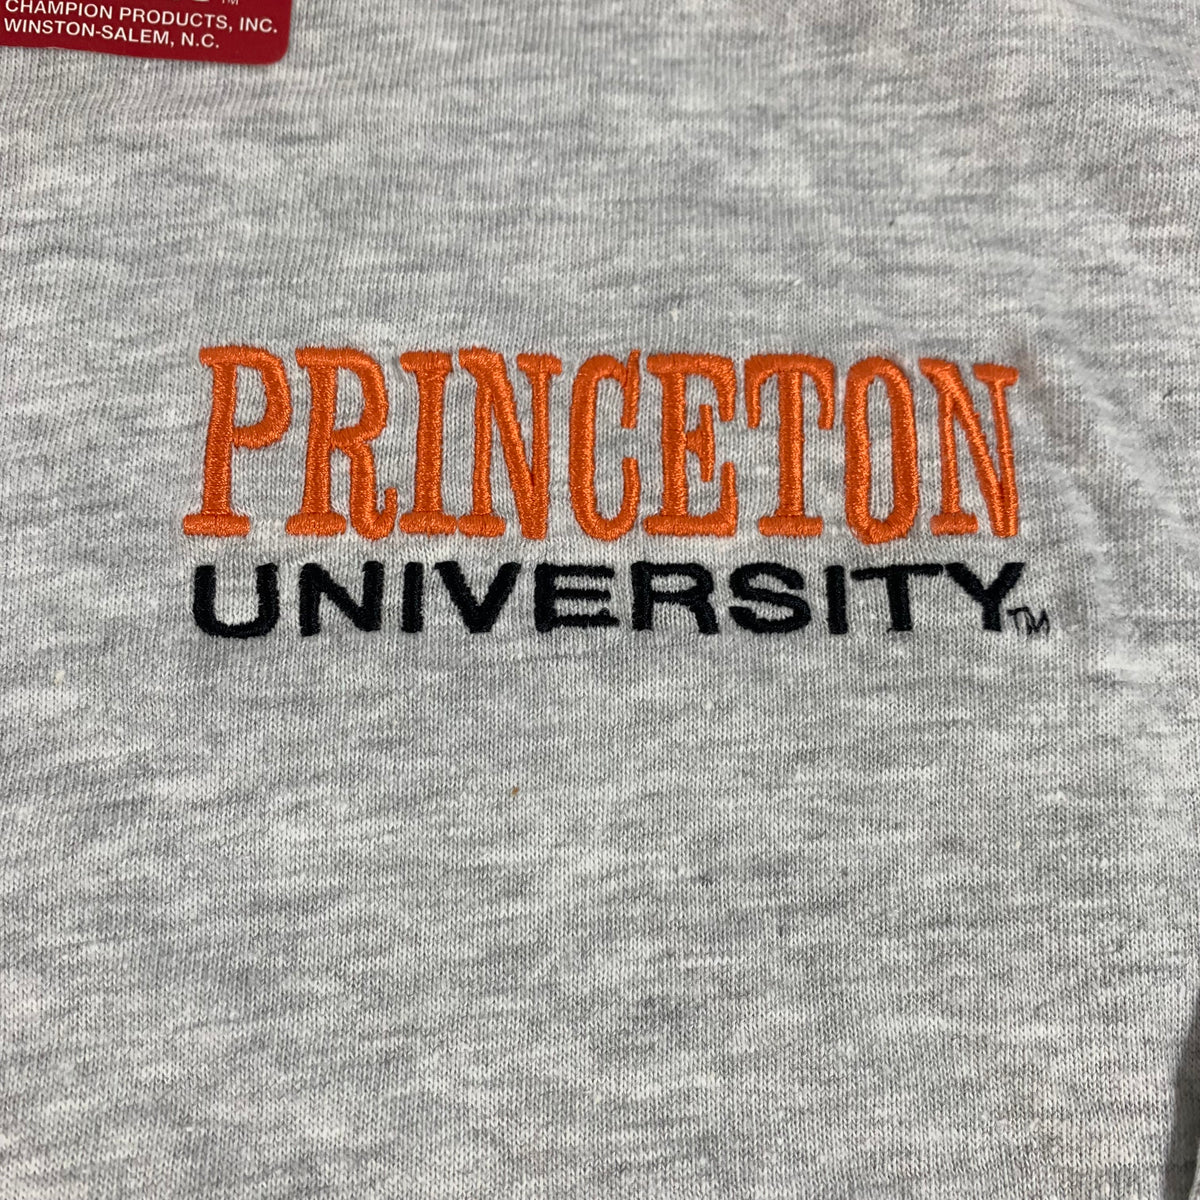 Vintage Princeton Champion &quot;Embroidered&quot; Long Sleeve Shirt